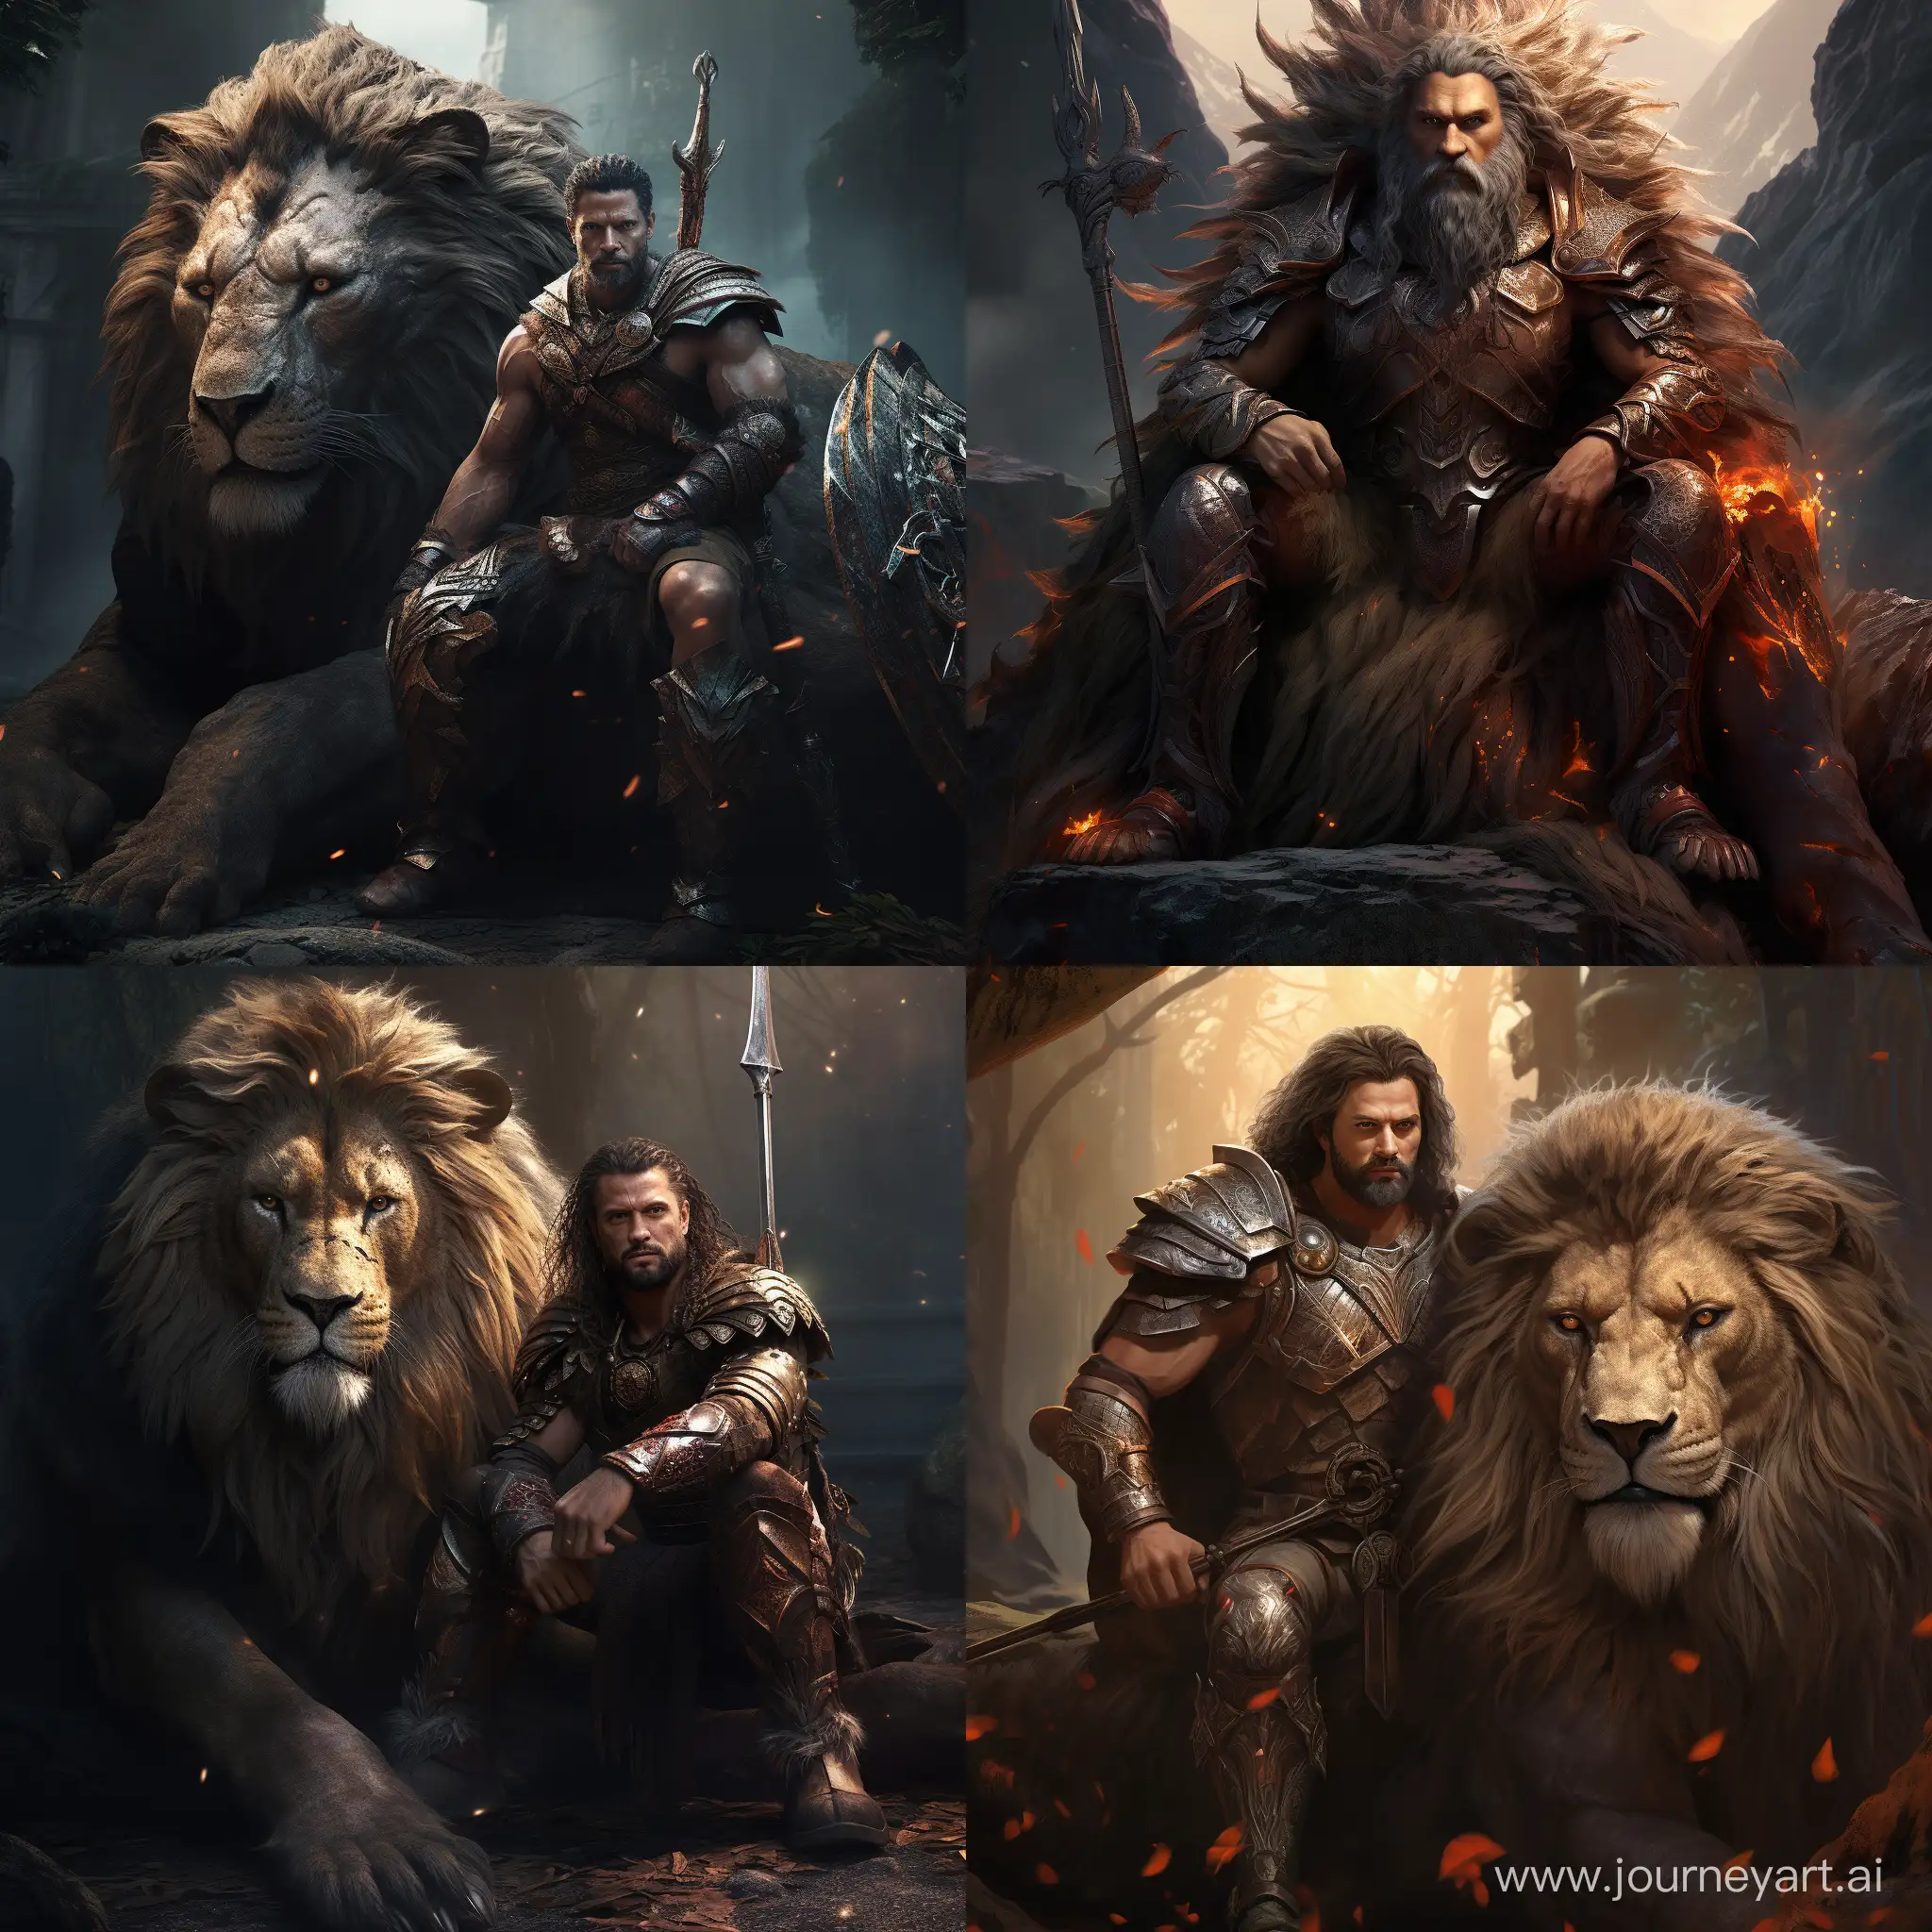 Mighty-Warrior-Riding-a-Majestic-Lion